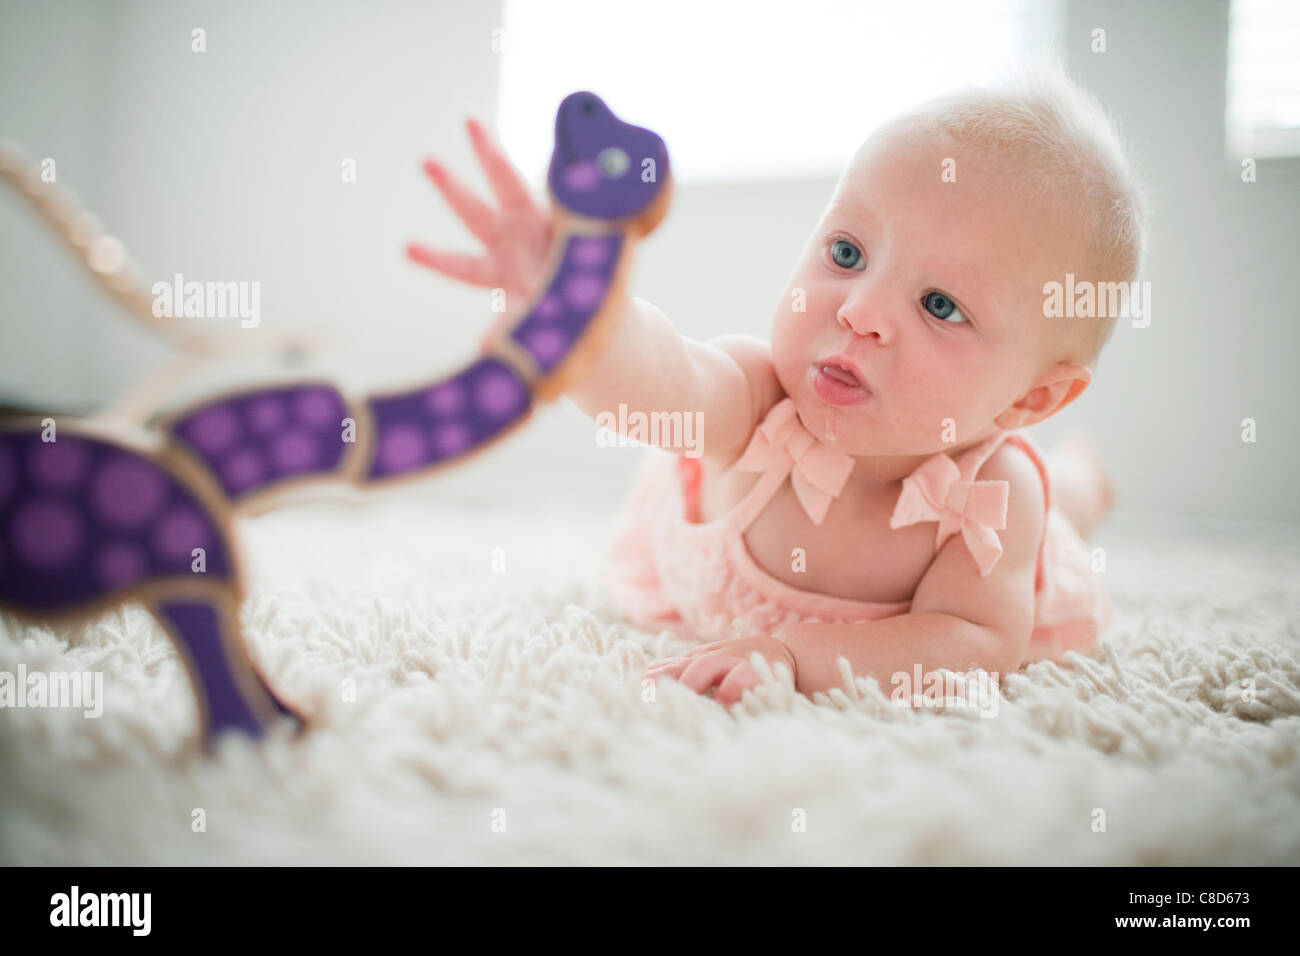 Baby Girl Playing with Wooden Toy Stock Photo